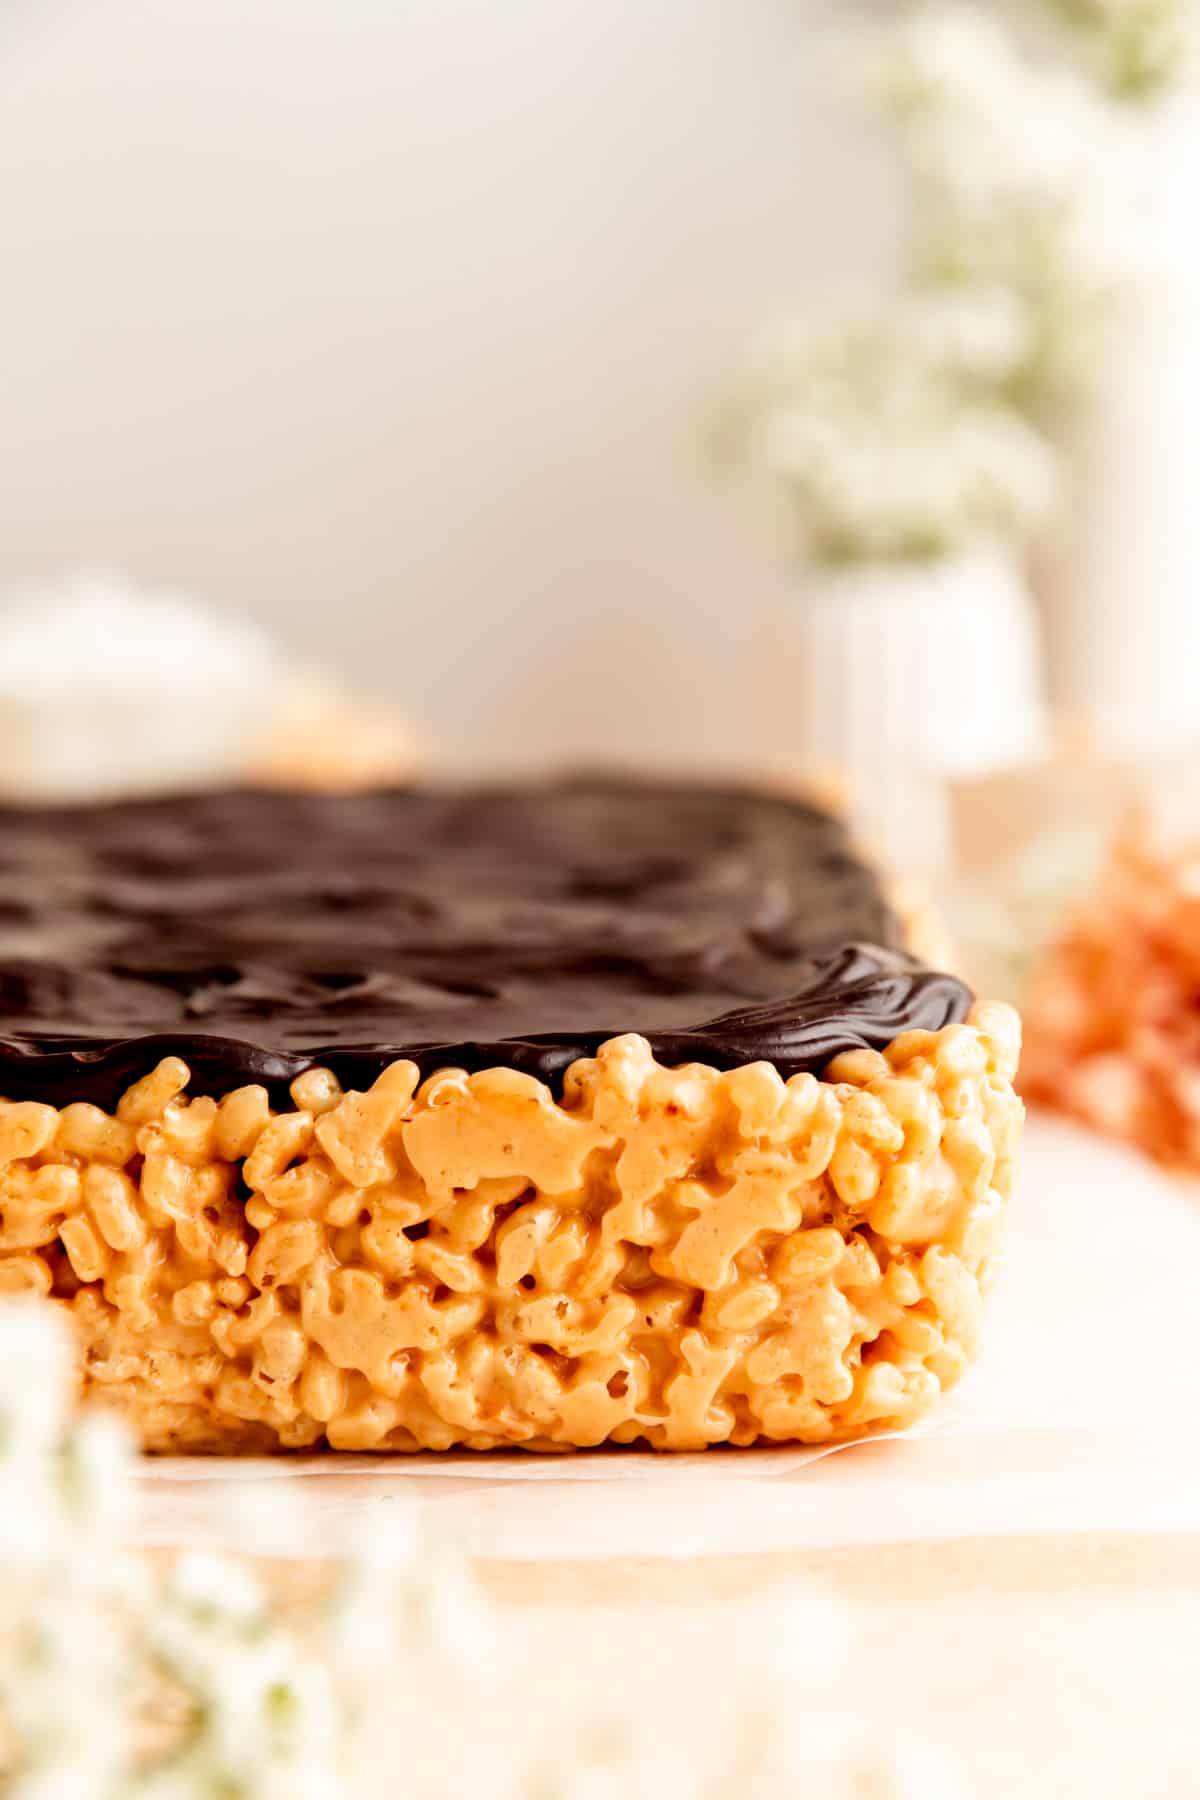 Side shot of a full block of peanut butter rice crispy treats with chocolate ganache.